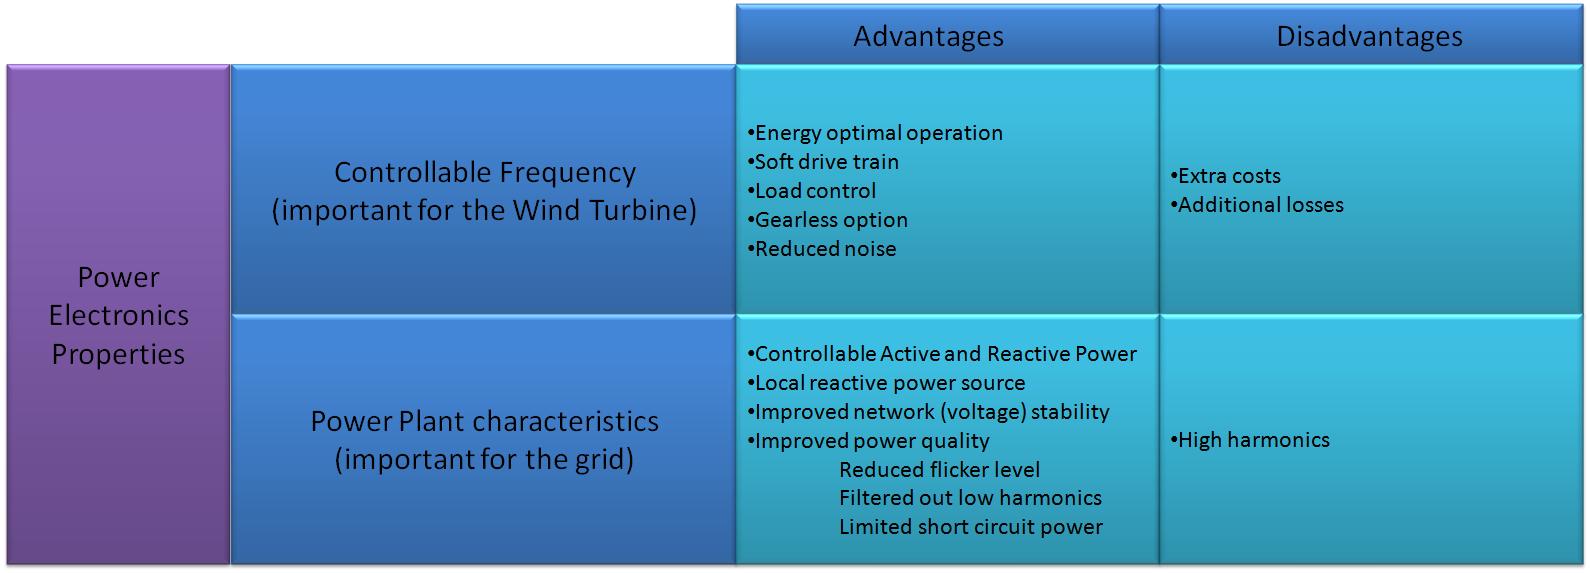 Wind Energy Advantages and Disadvantages